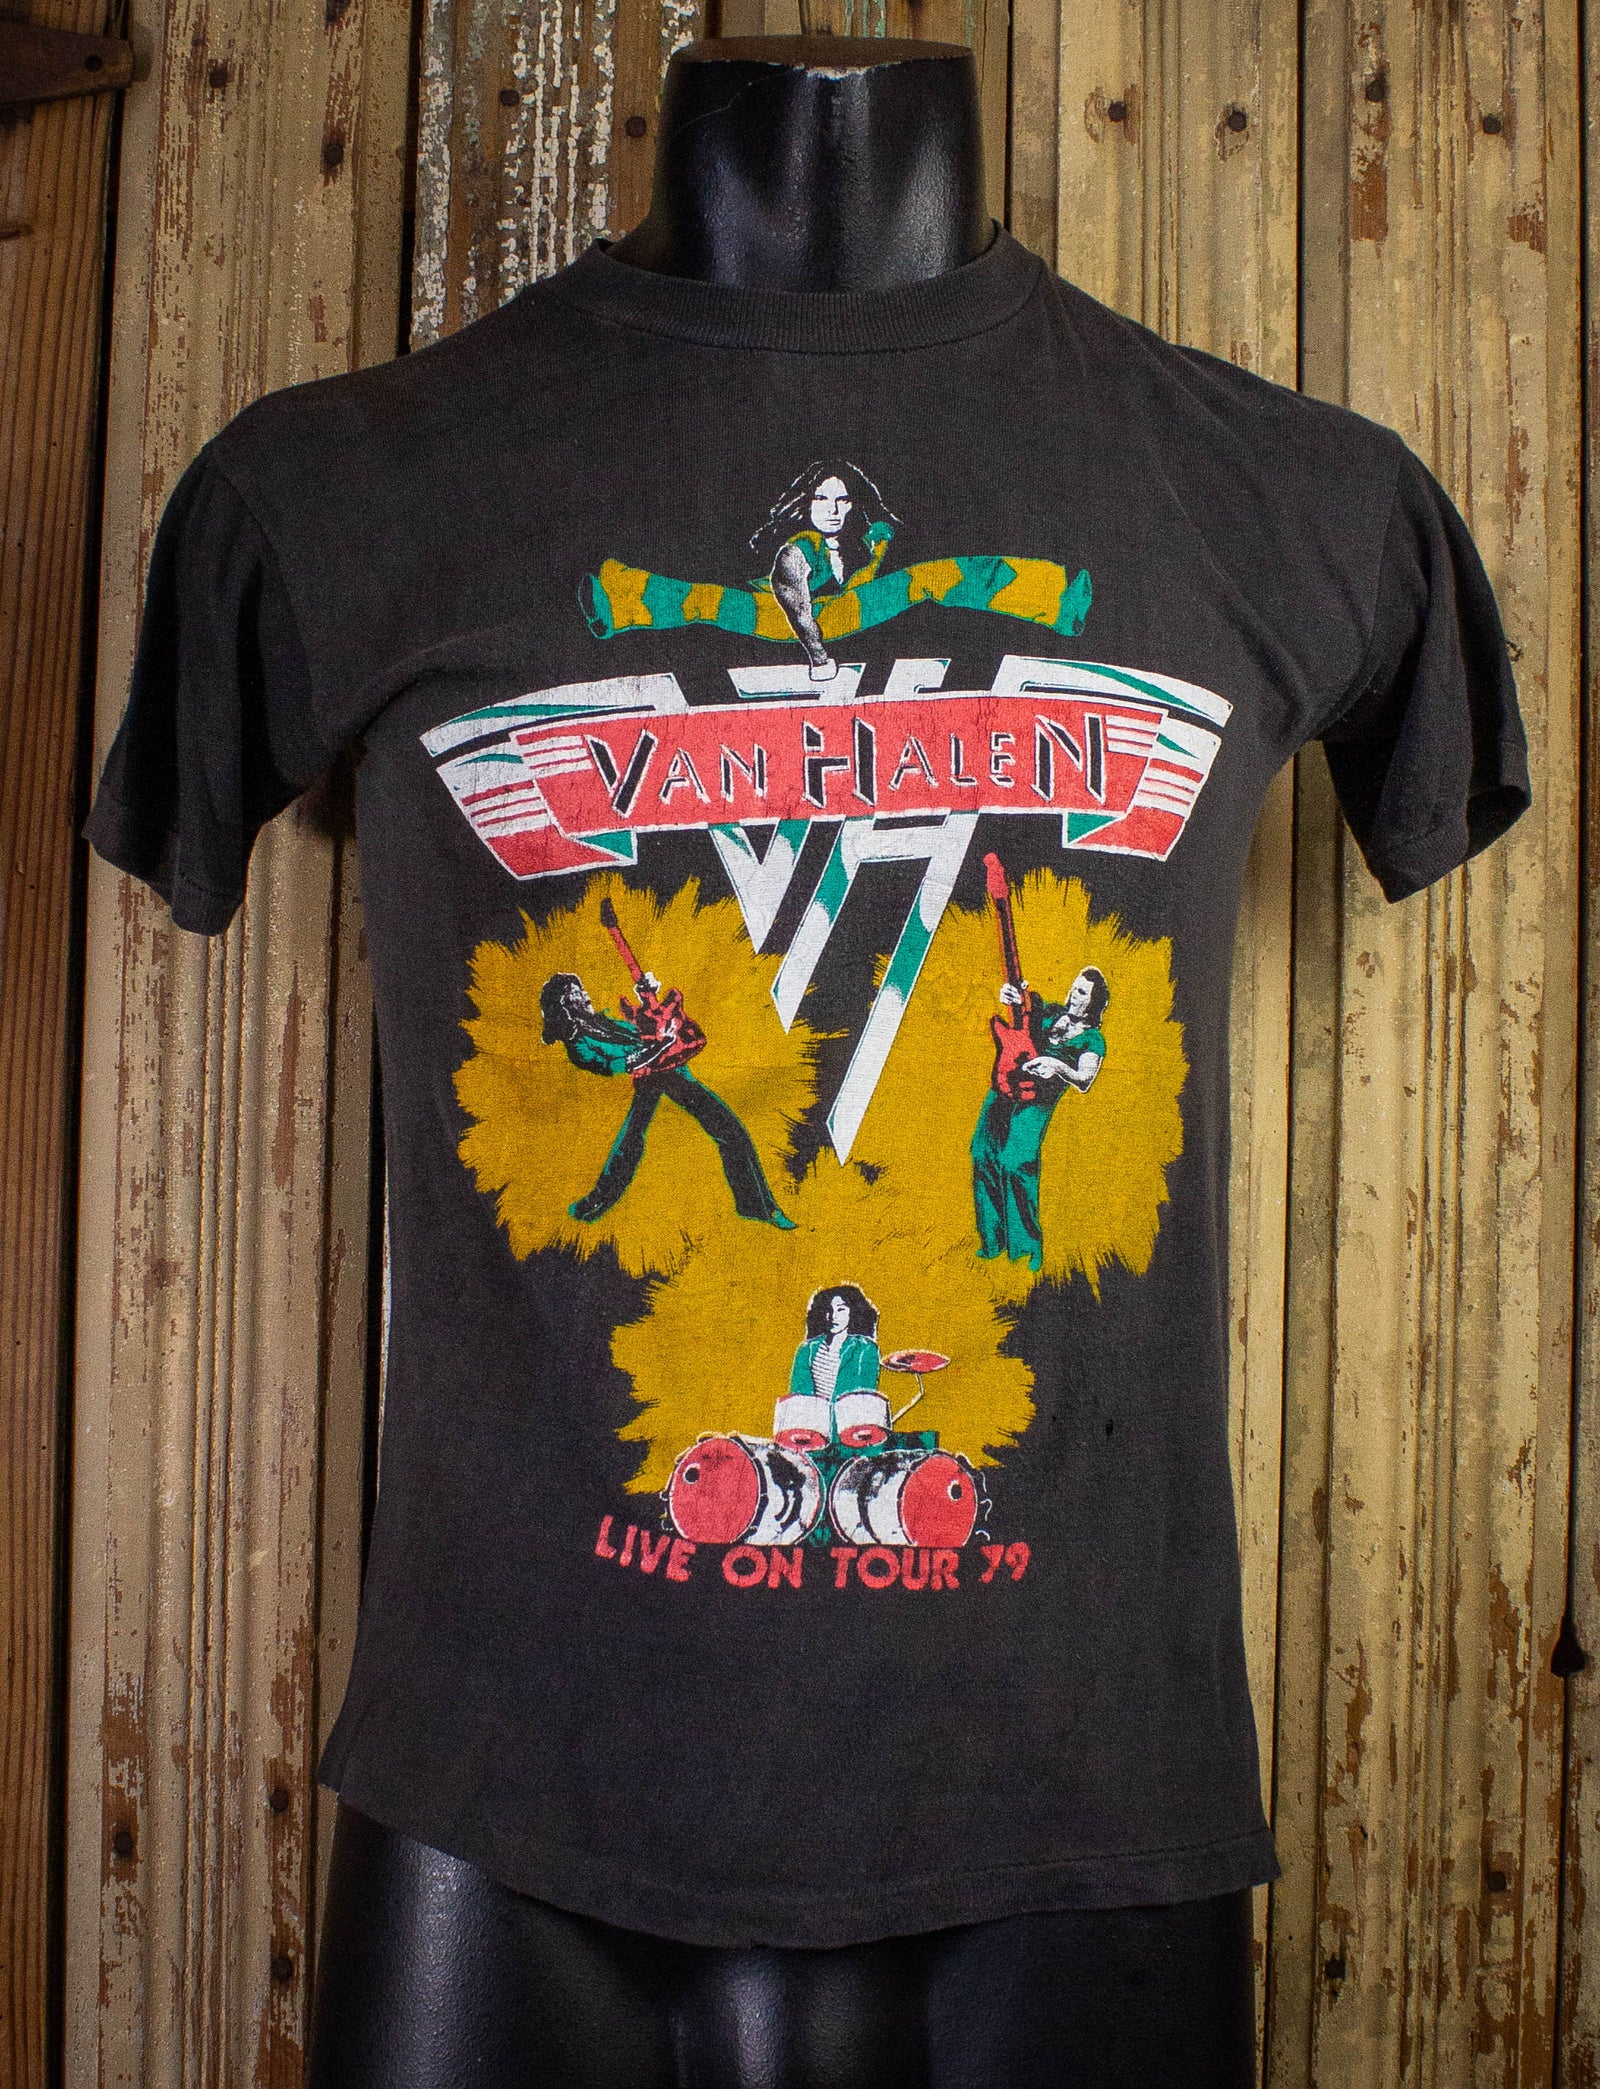 LV T-Shirt – Luther Vandross Official Store